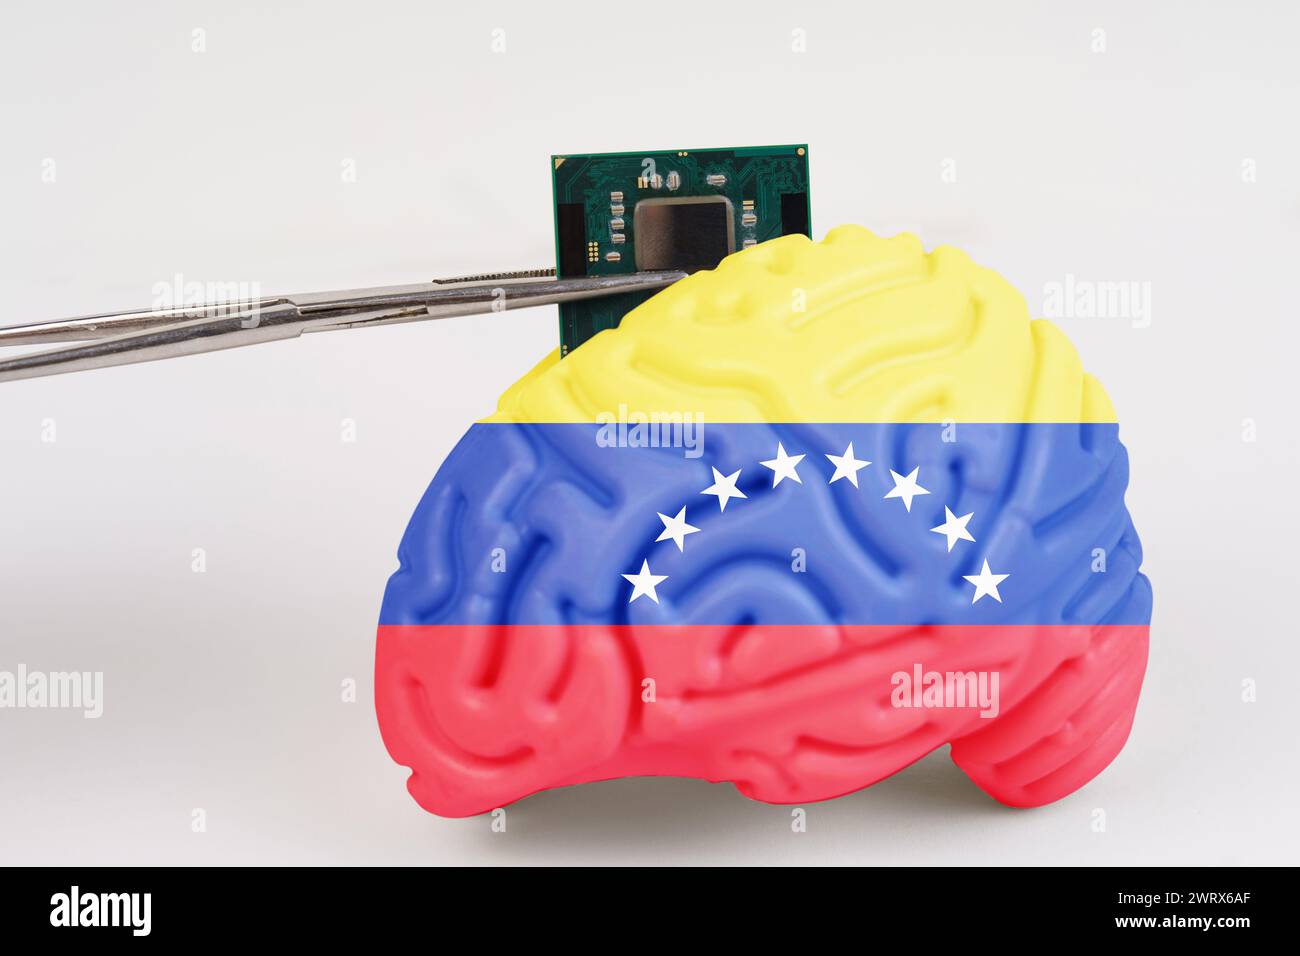 On a white background, a model of the brain with a picture of a flag - Venezuela, a microcircuit, a processor, is implanted into it. Close-up Stock Photo